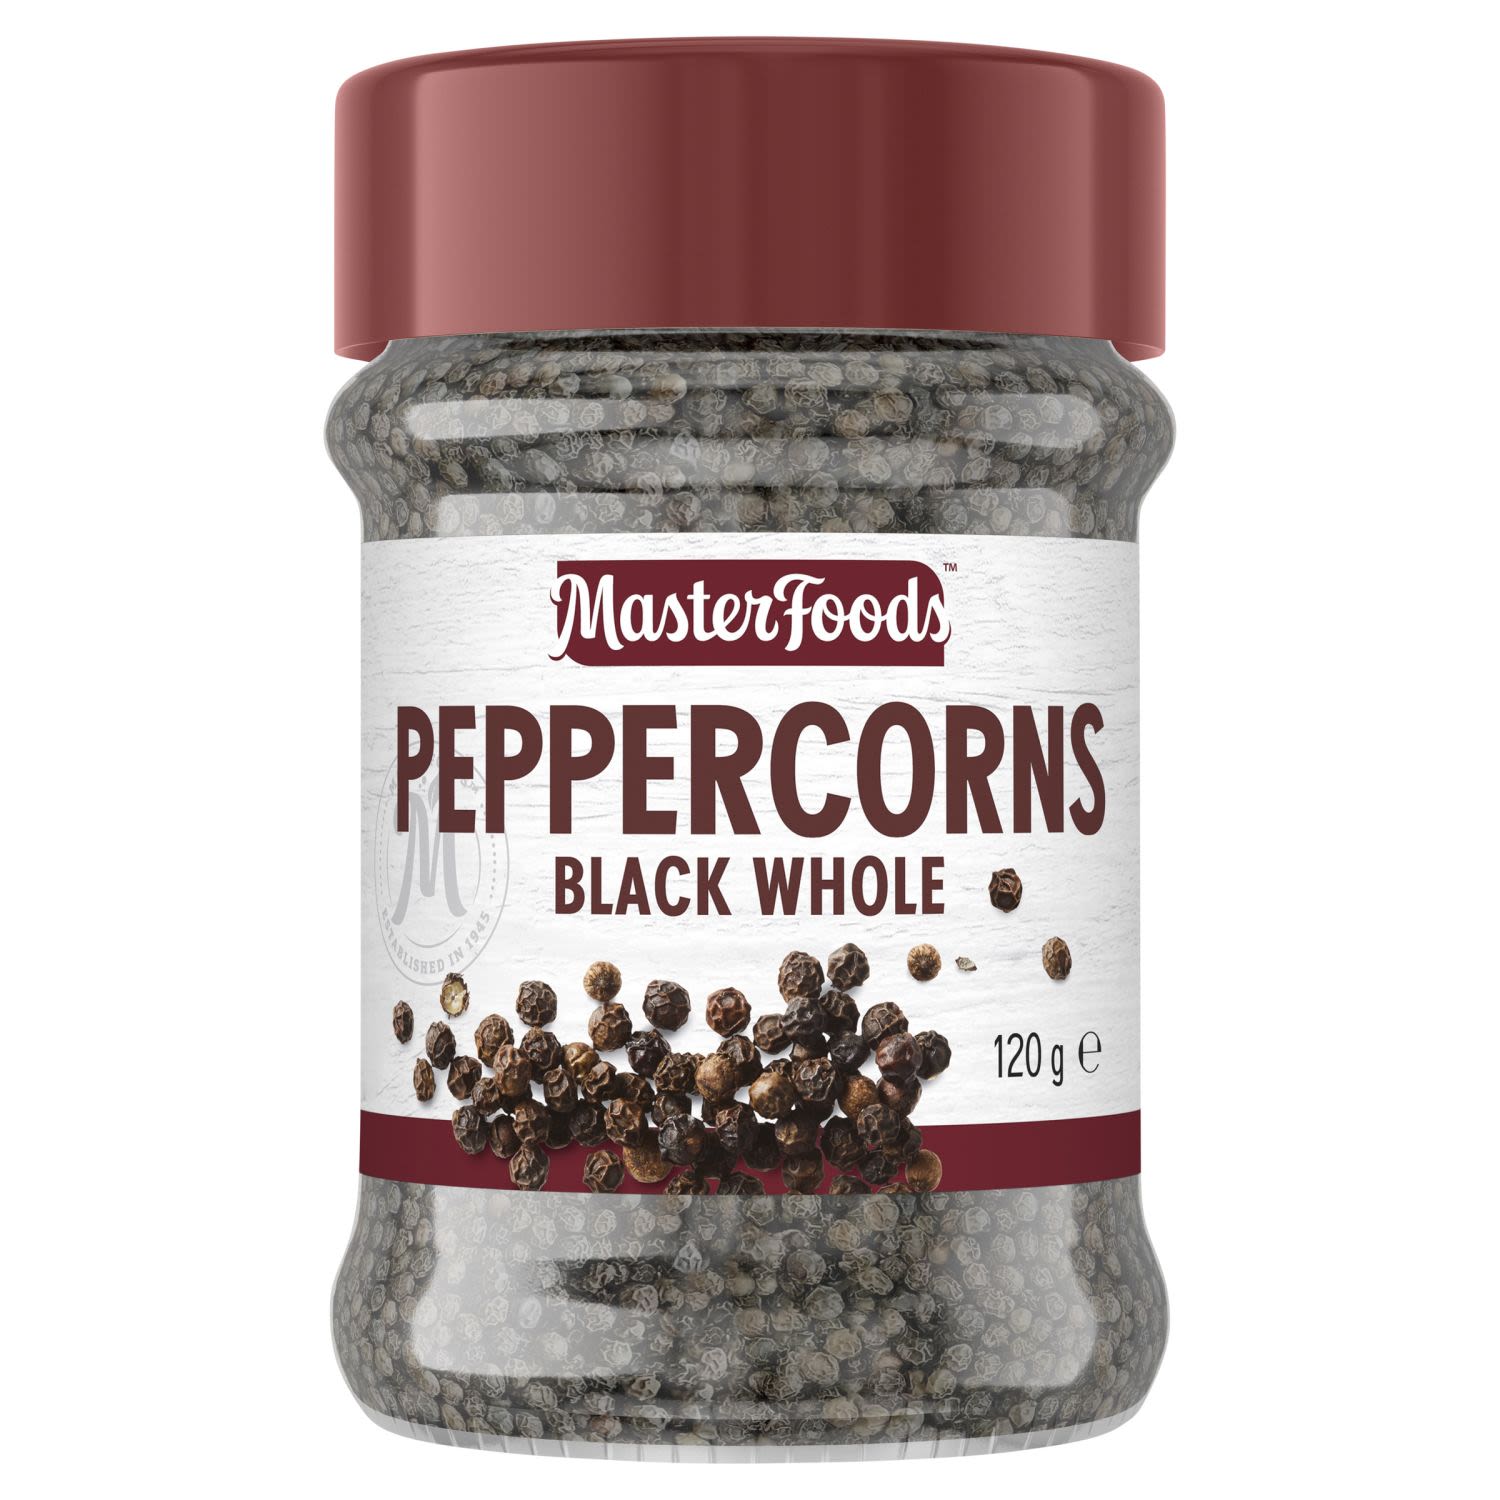 Masterfoods Herbs & Spices Black Peppercorns Whole, 120 Gram